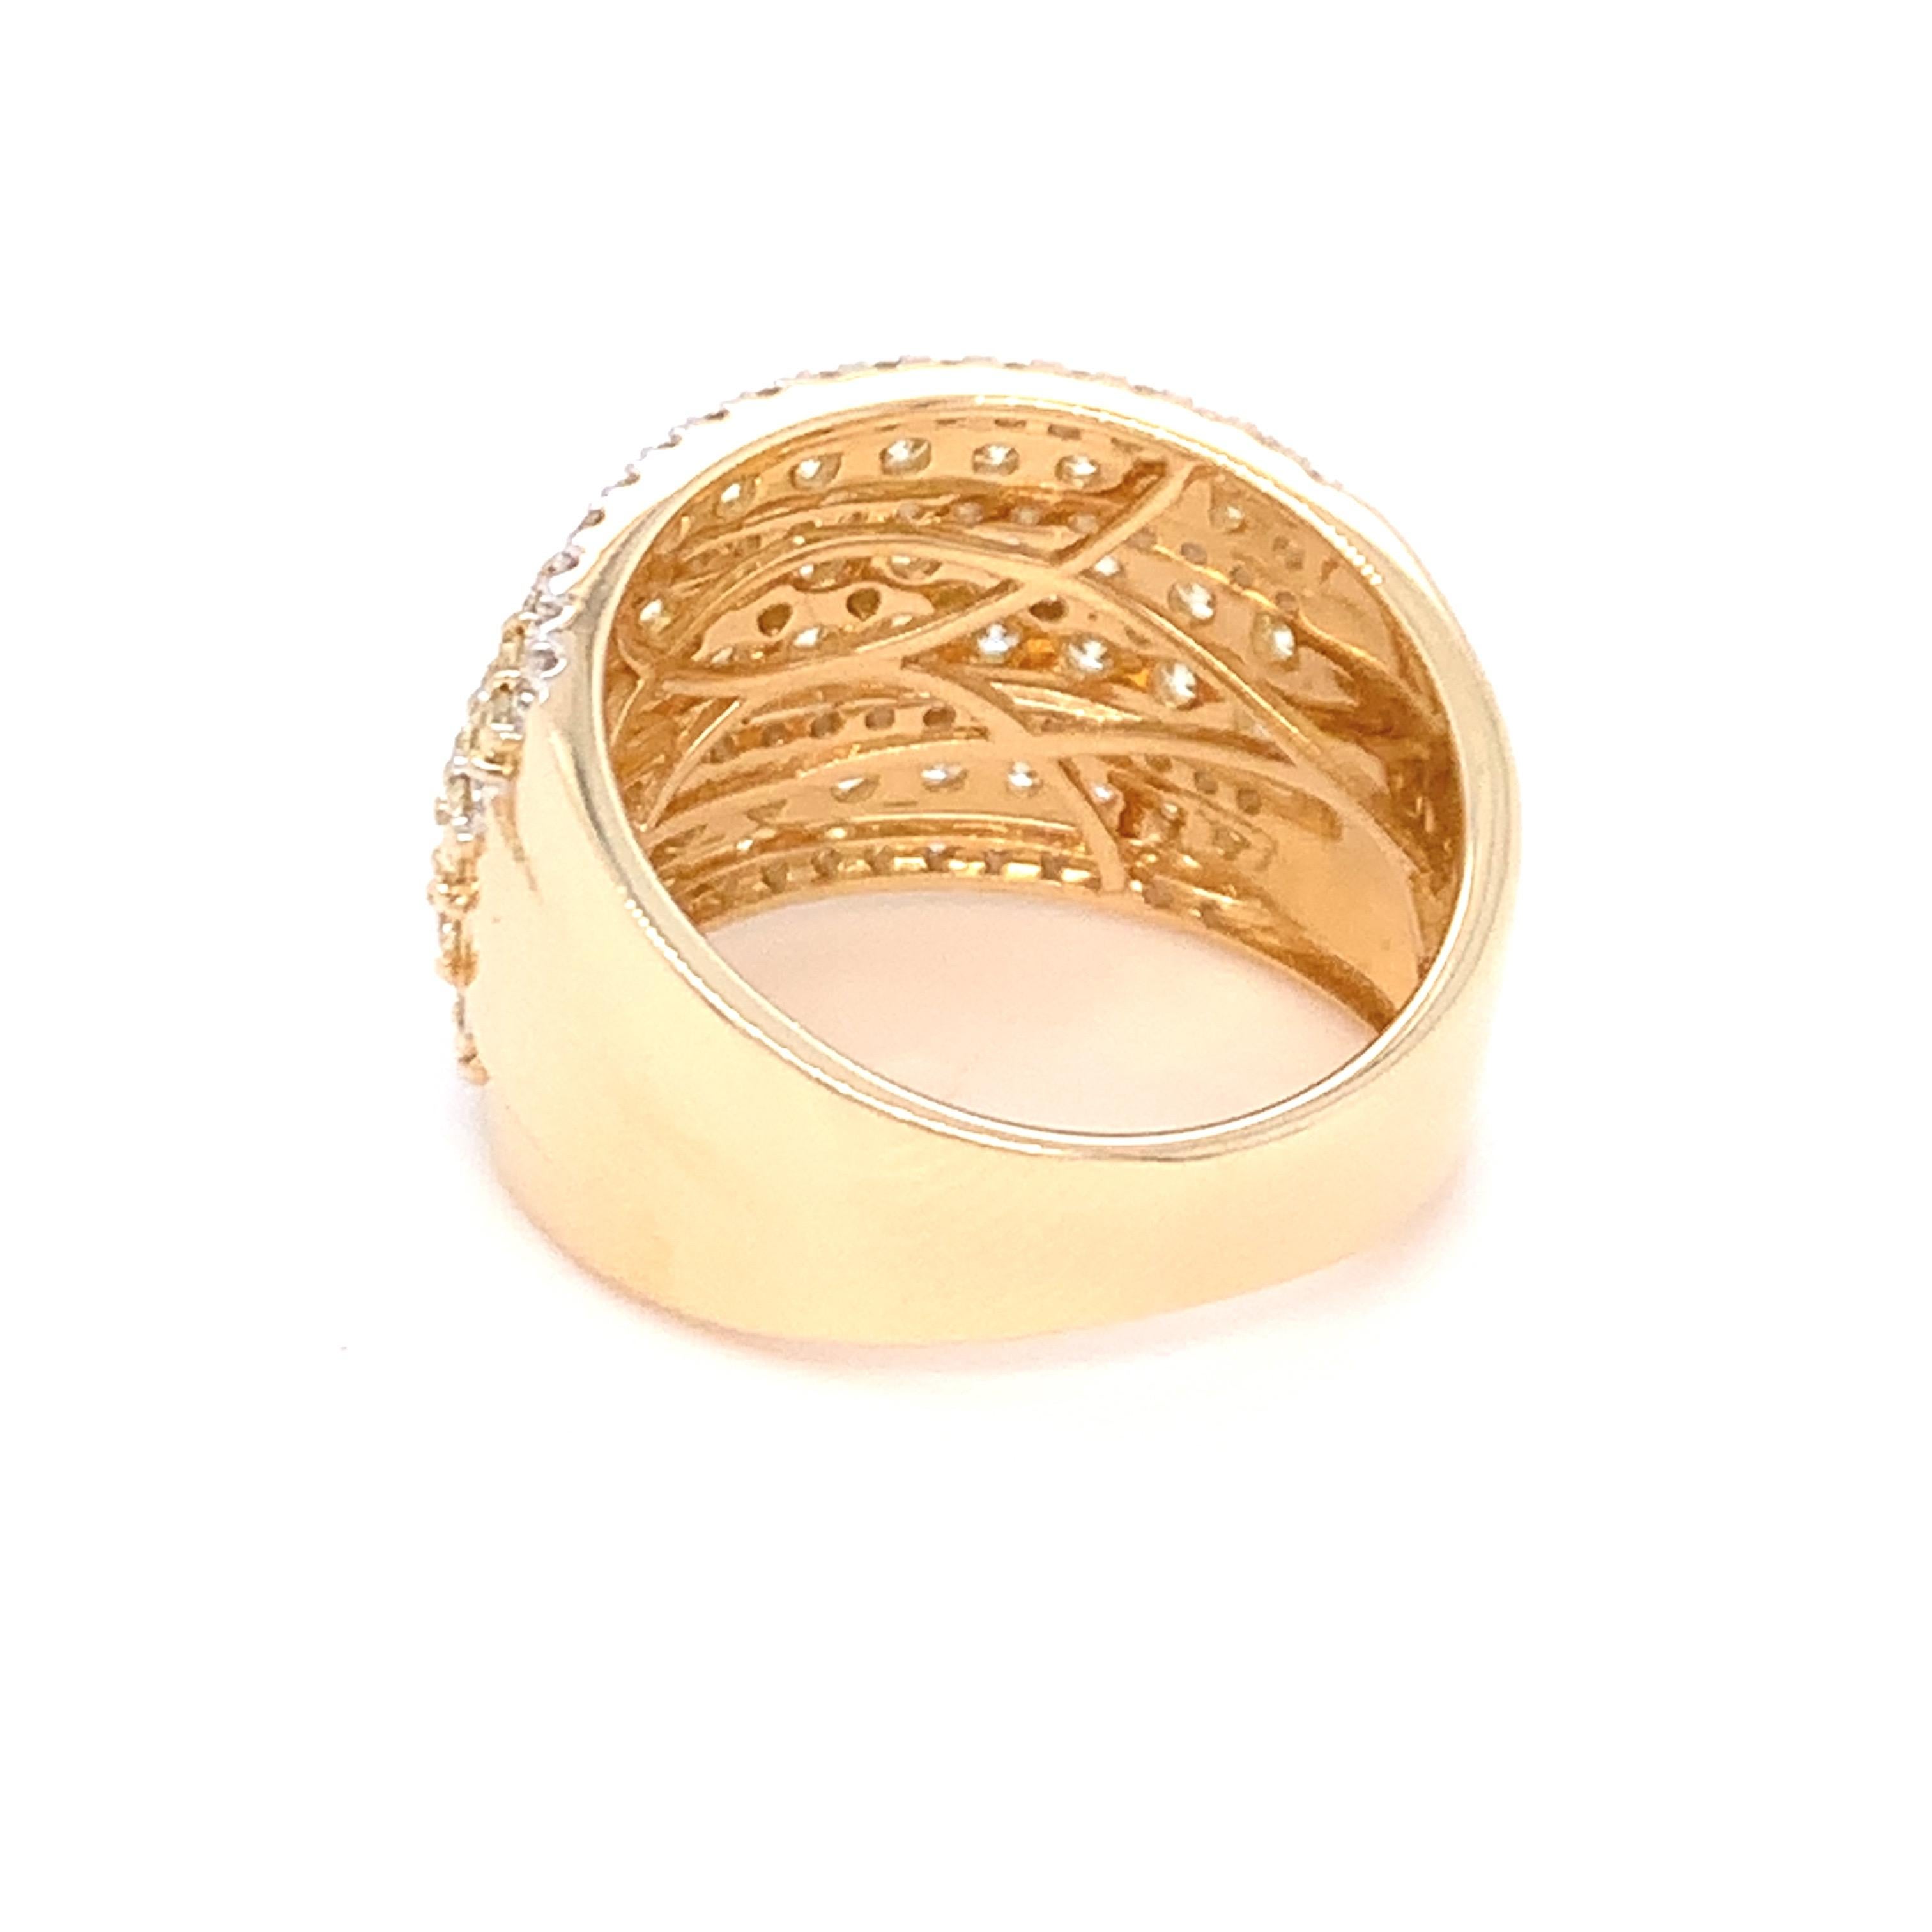 2.08 Carat Diamond Band Ring in 14k Yellow Gold For Sale 9